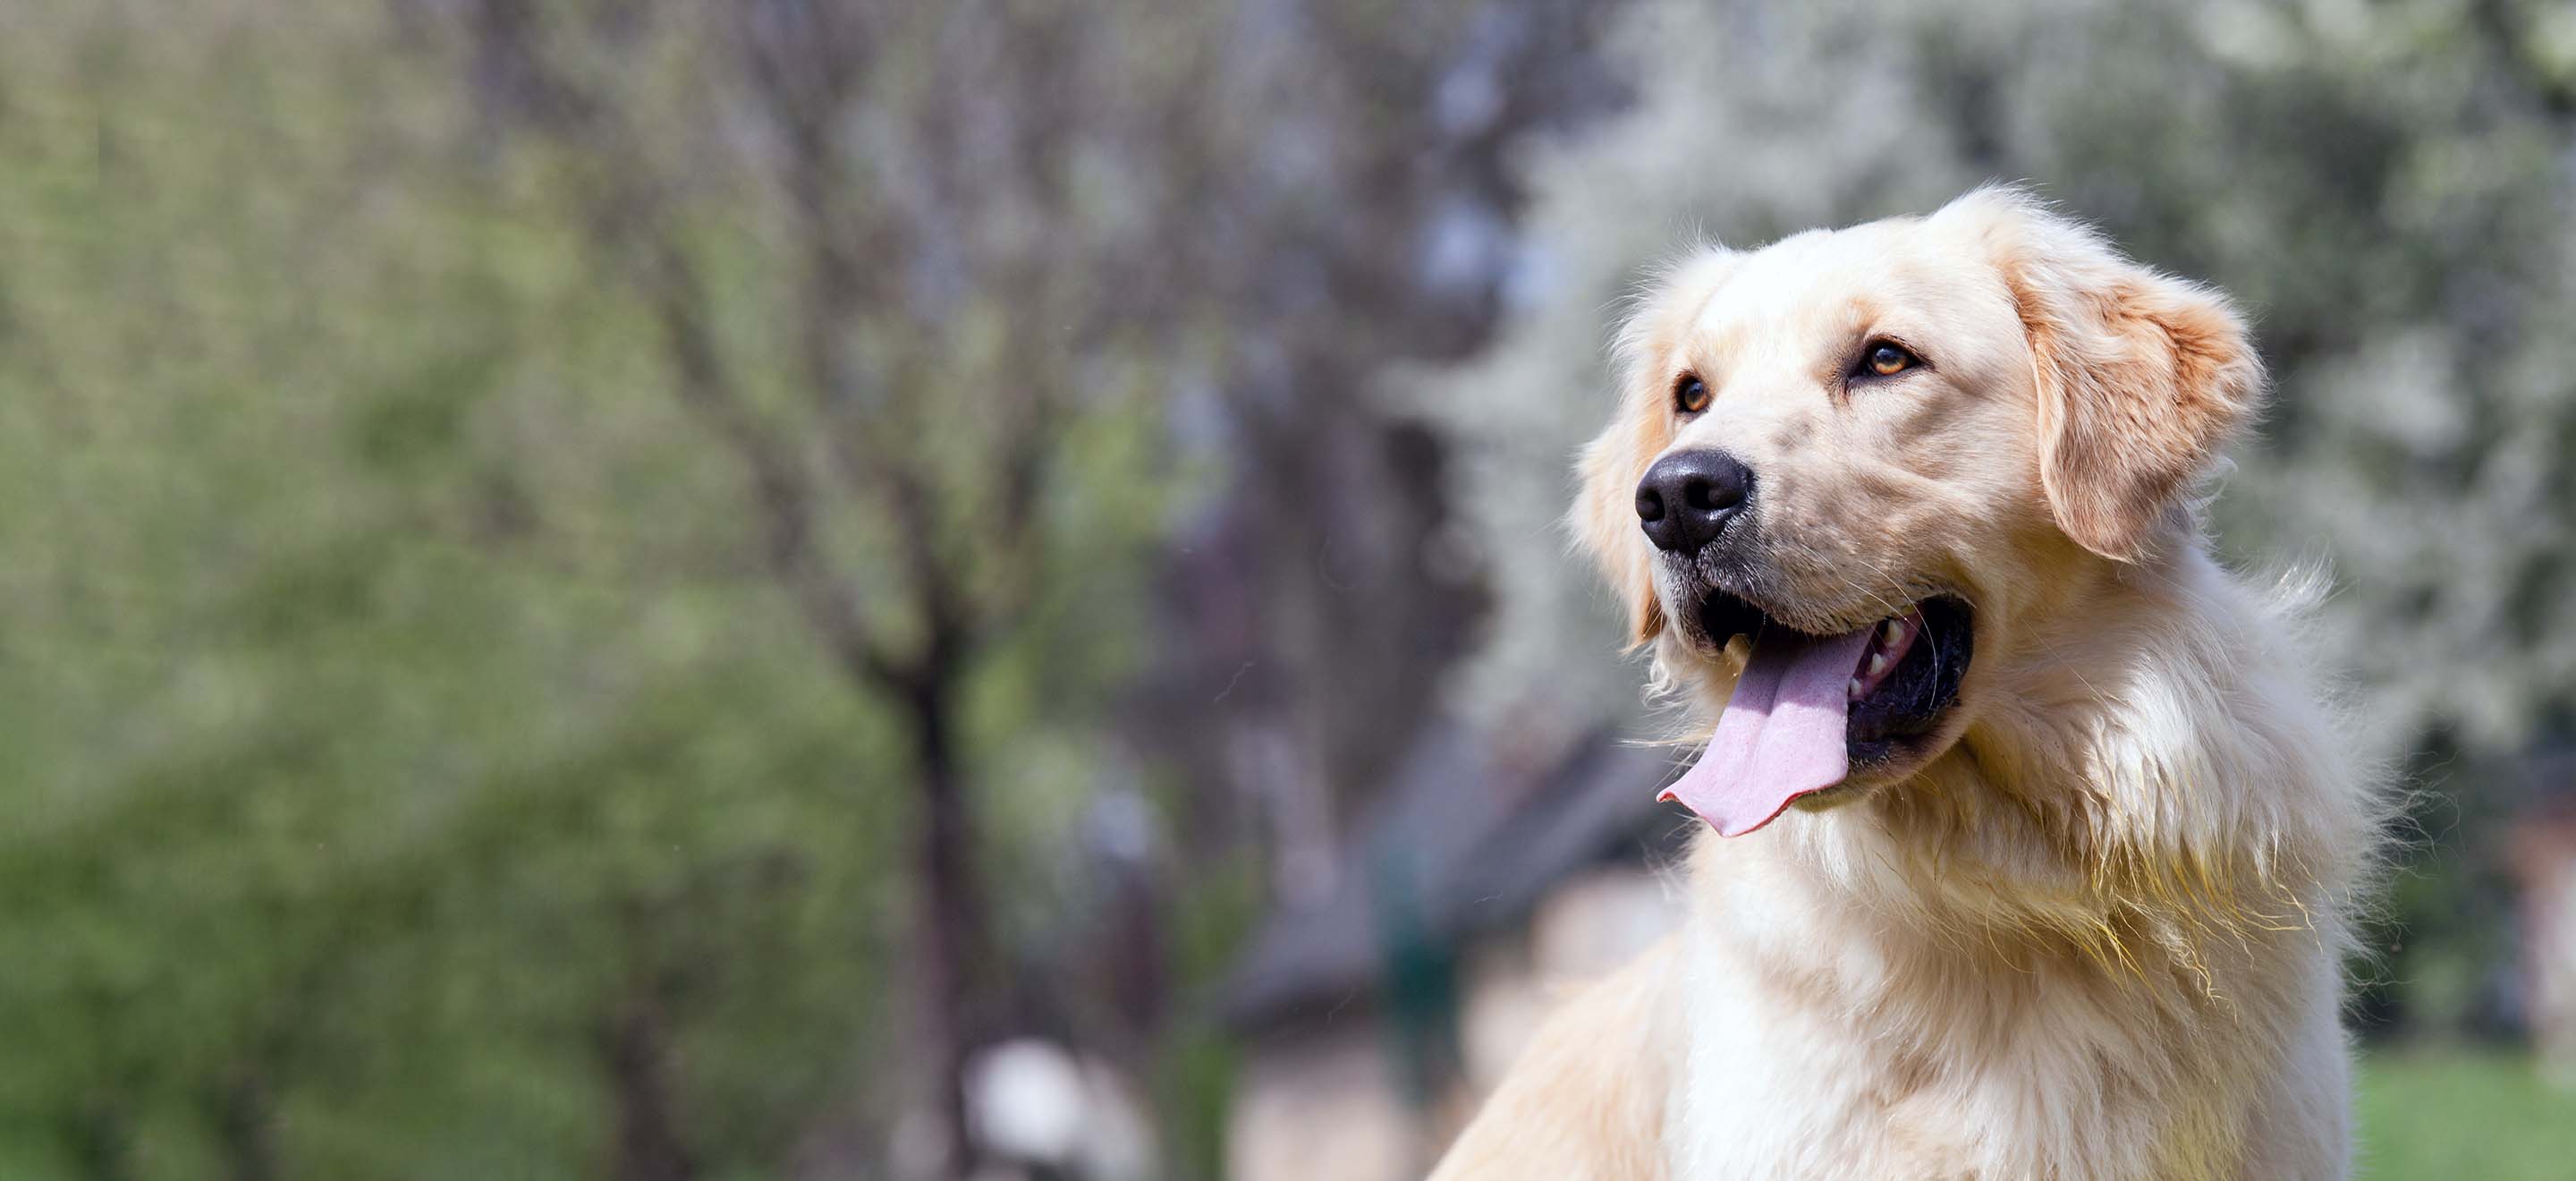 Golden Retriever at a park outside image